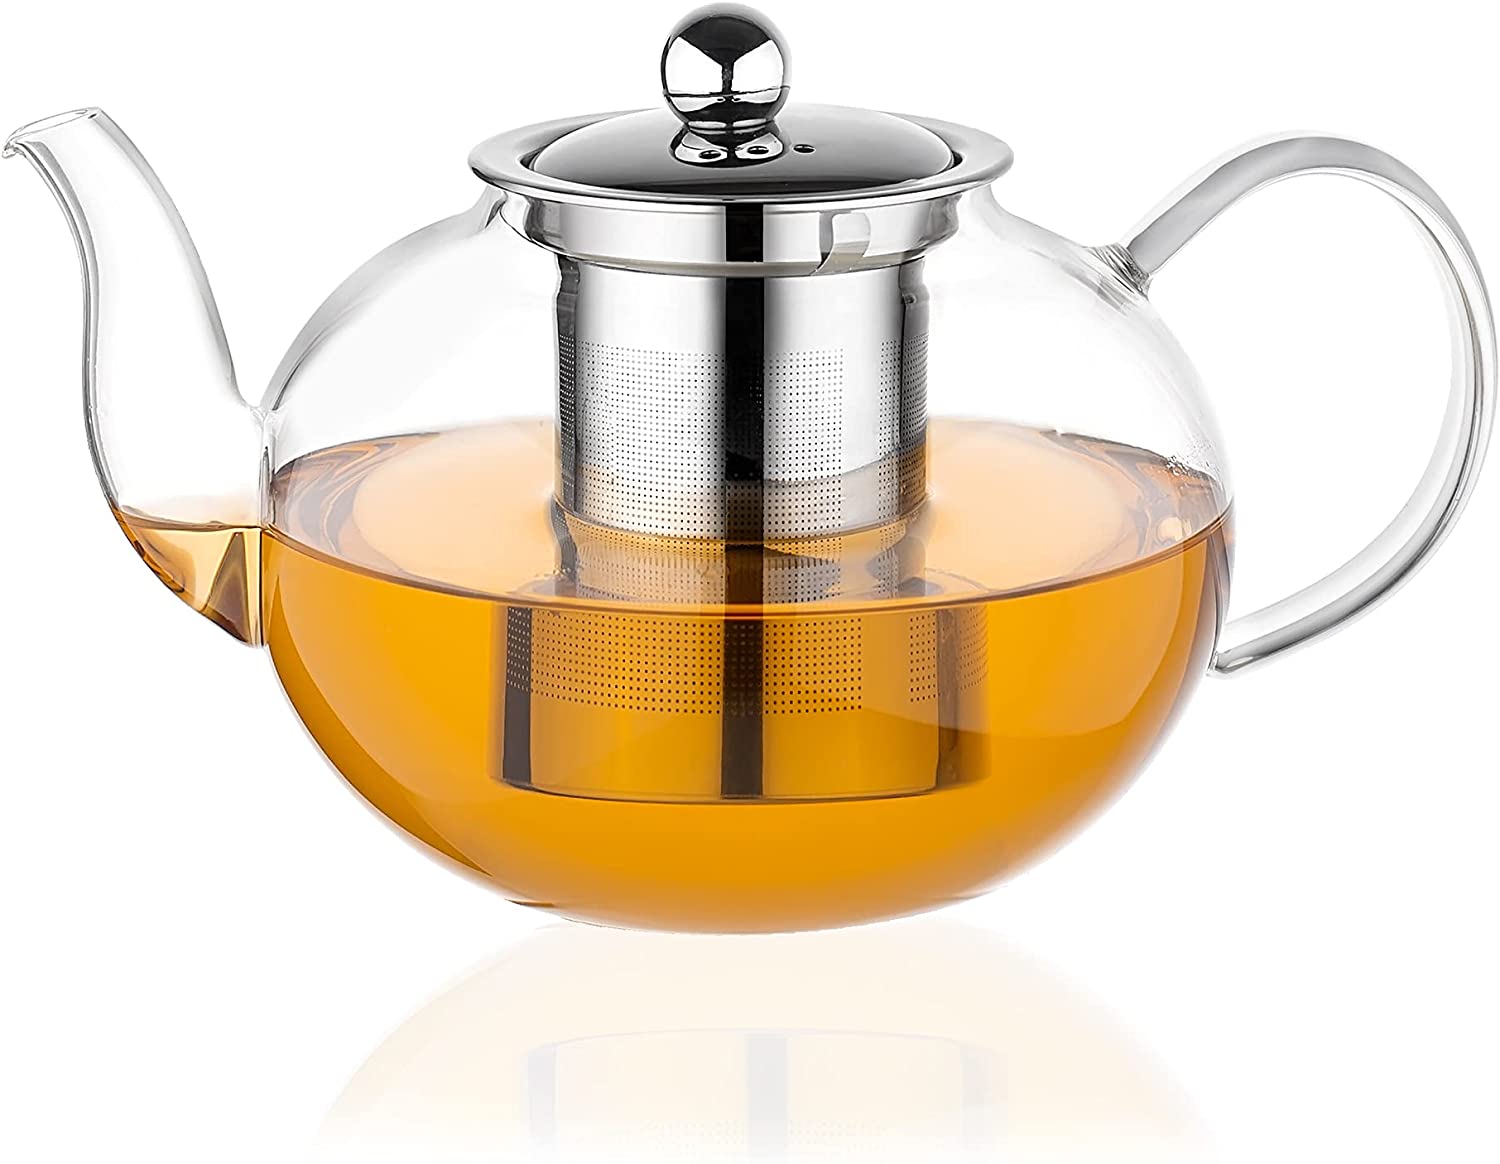 Amisglass Teapot Glass with Strainer 1300 ml, Large Glass Jug for Tea, Glass Tea Maker with Removable 18/8 Stainless Steel Strainer, Heat Resistant and High Quality, Ideal for Preparing Loose Tea